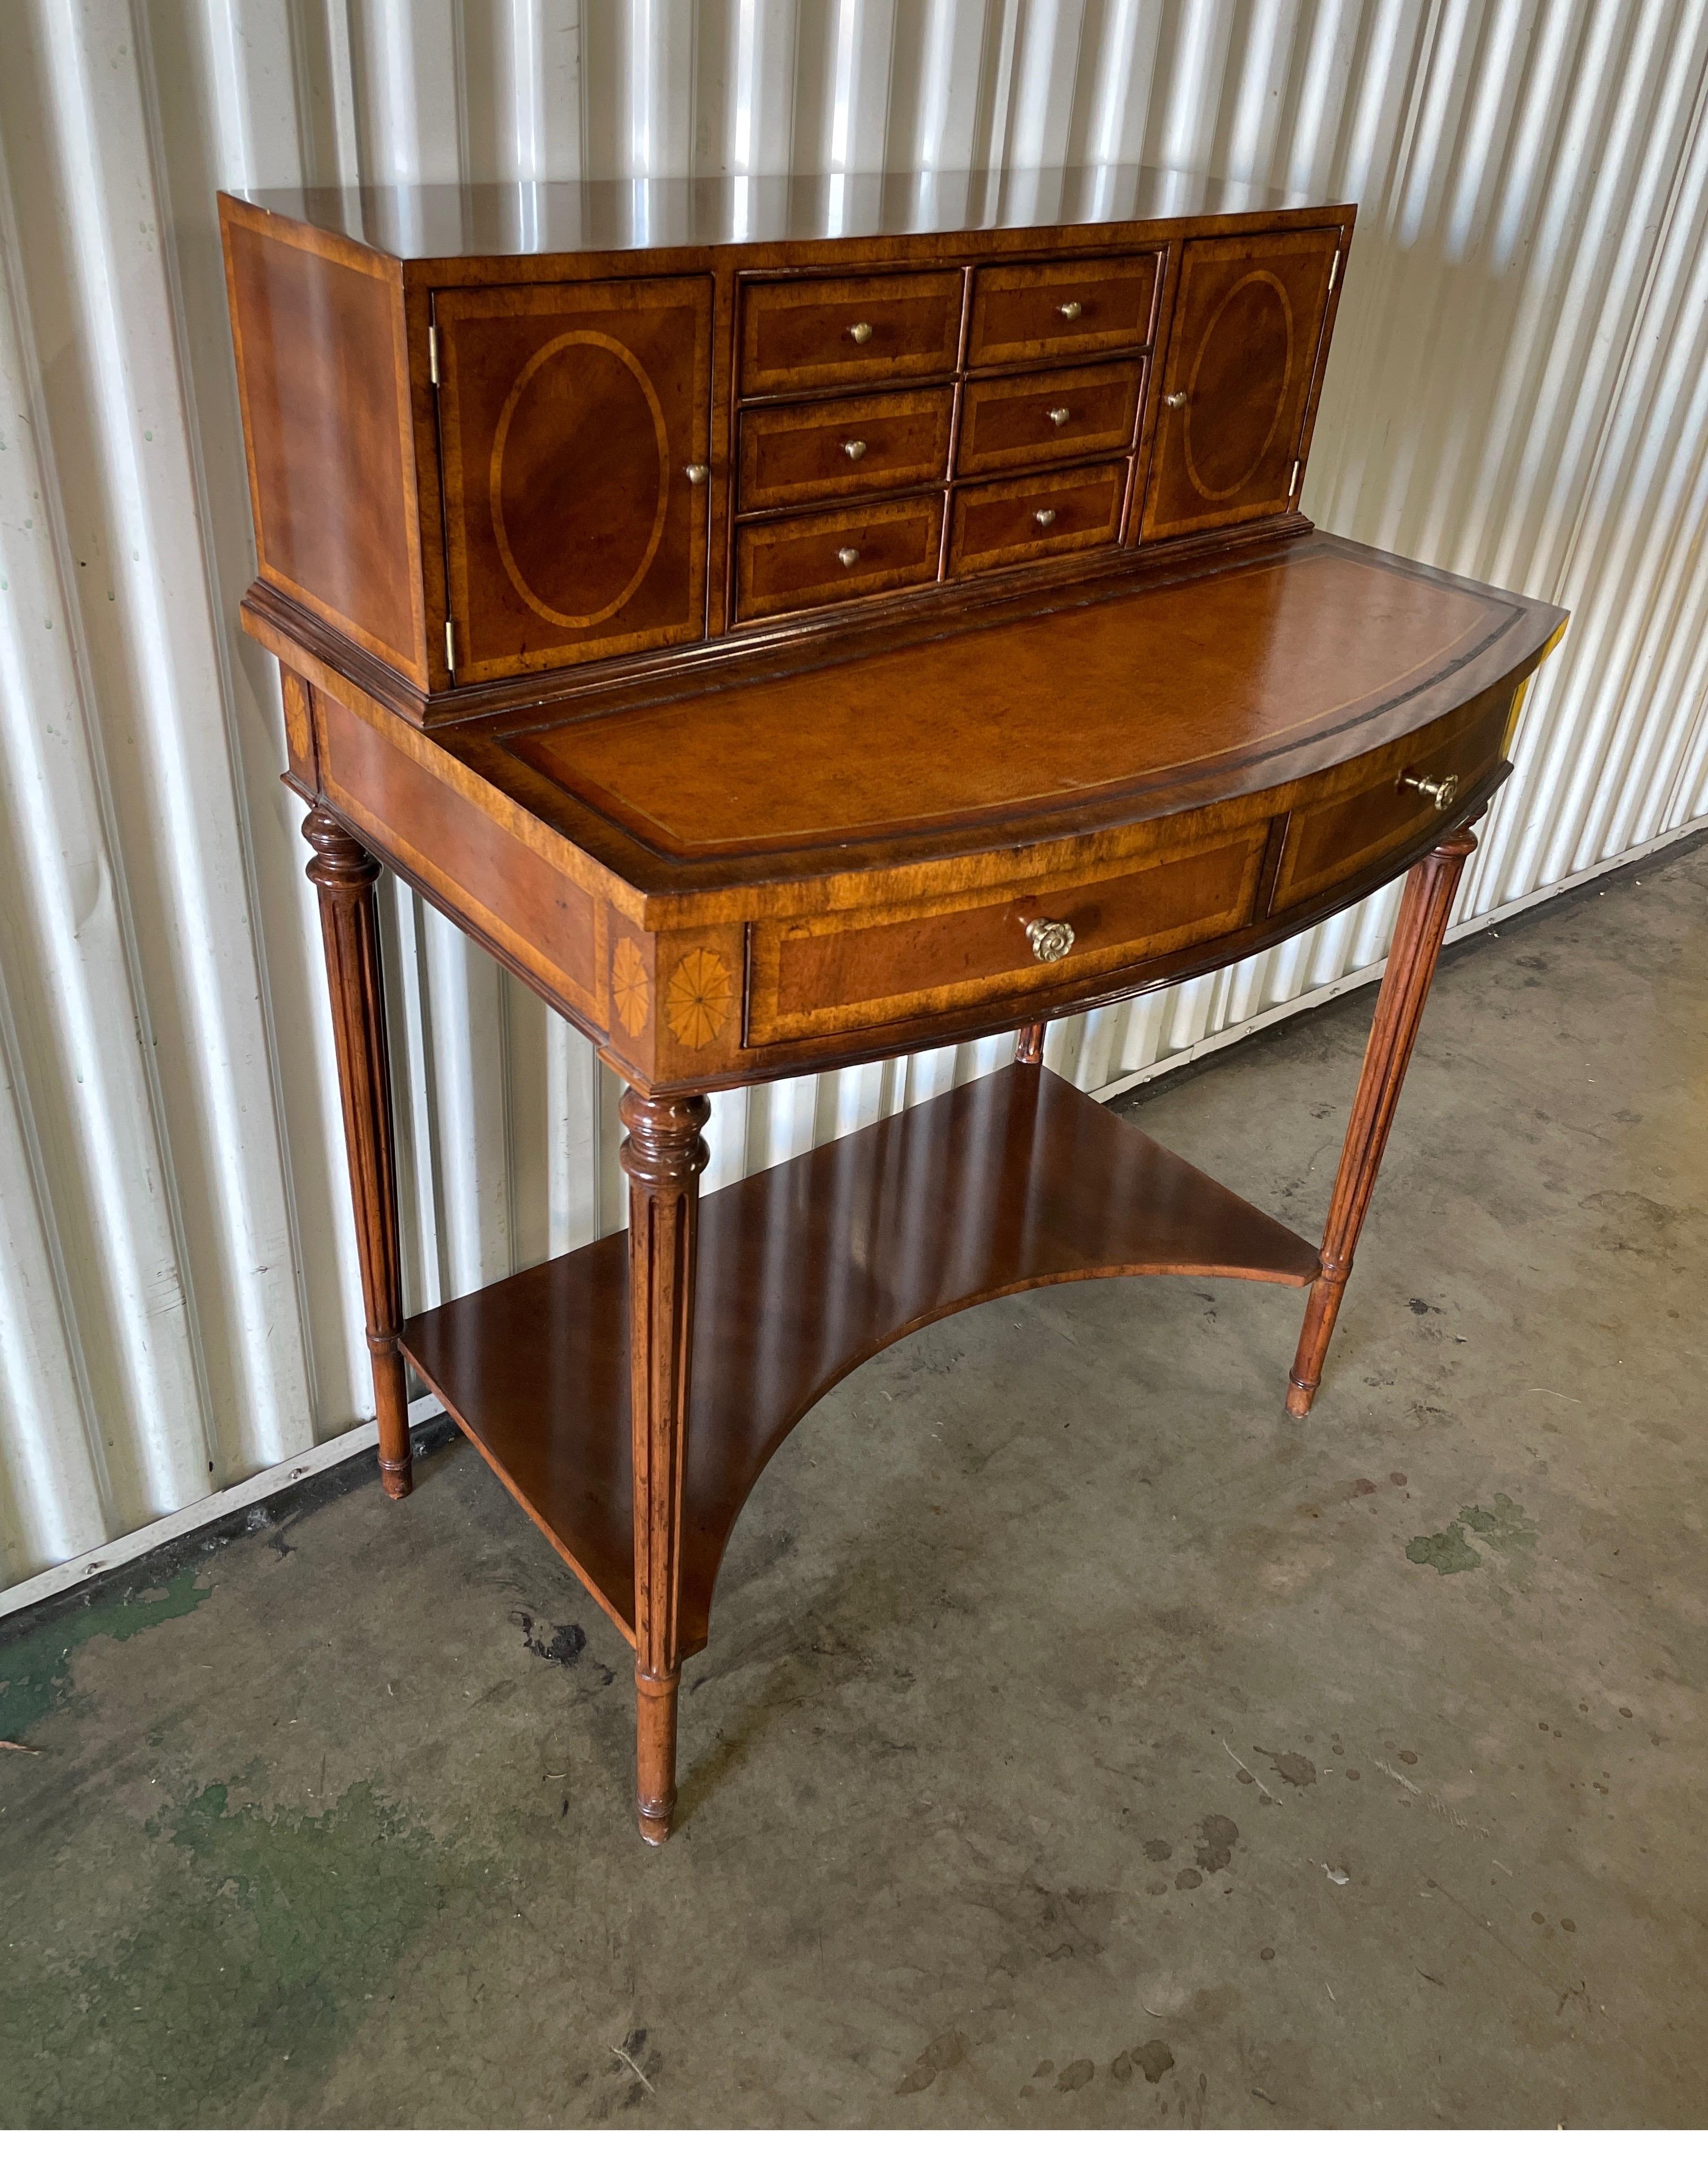 Sheraton style Bonheur du Jour. This fine desk has two main drawers & six small drawers plus two compartments in the upper gallery.